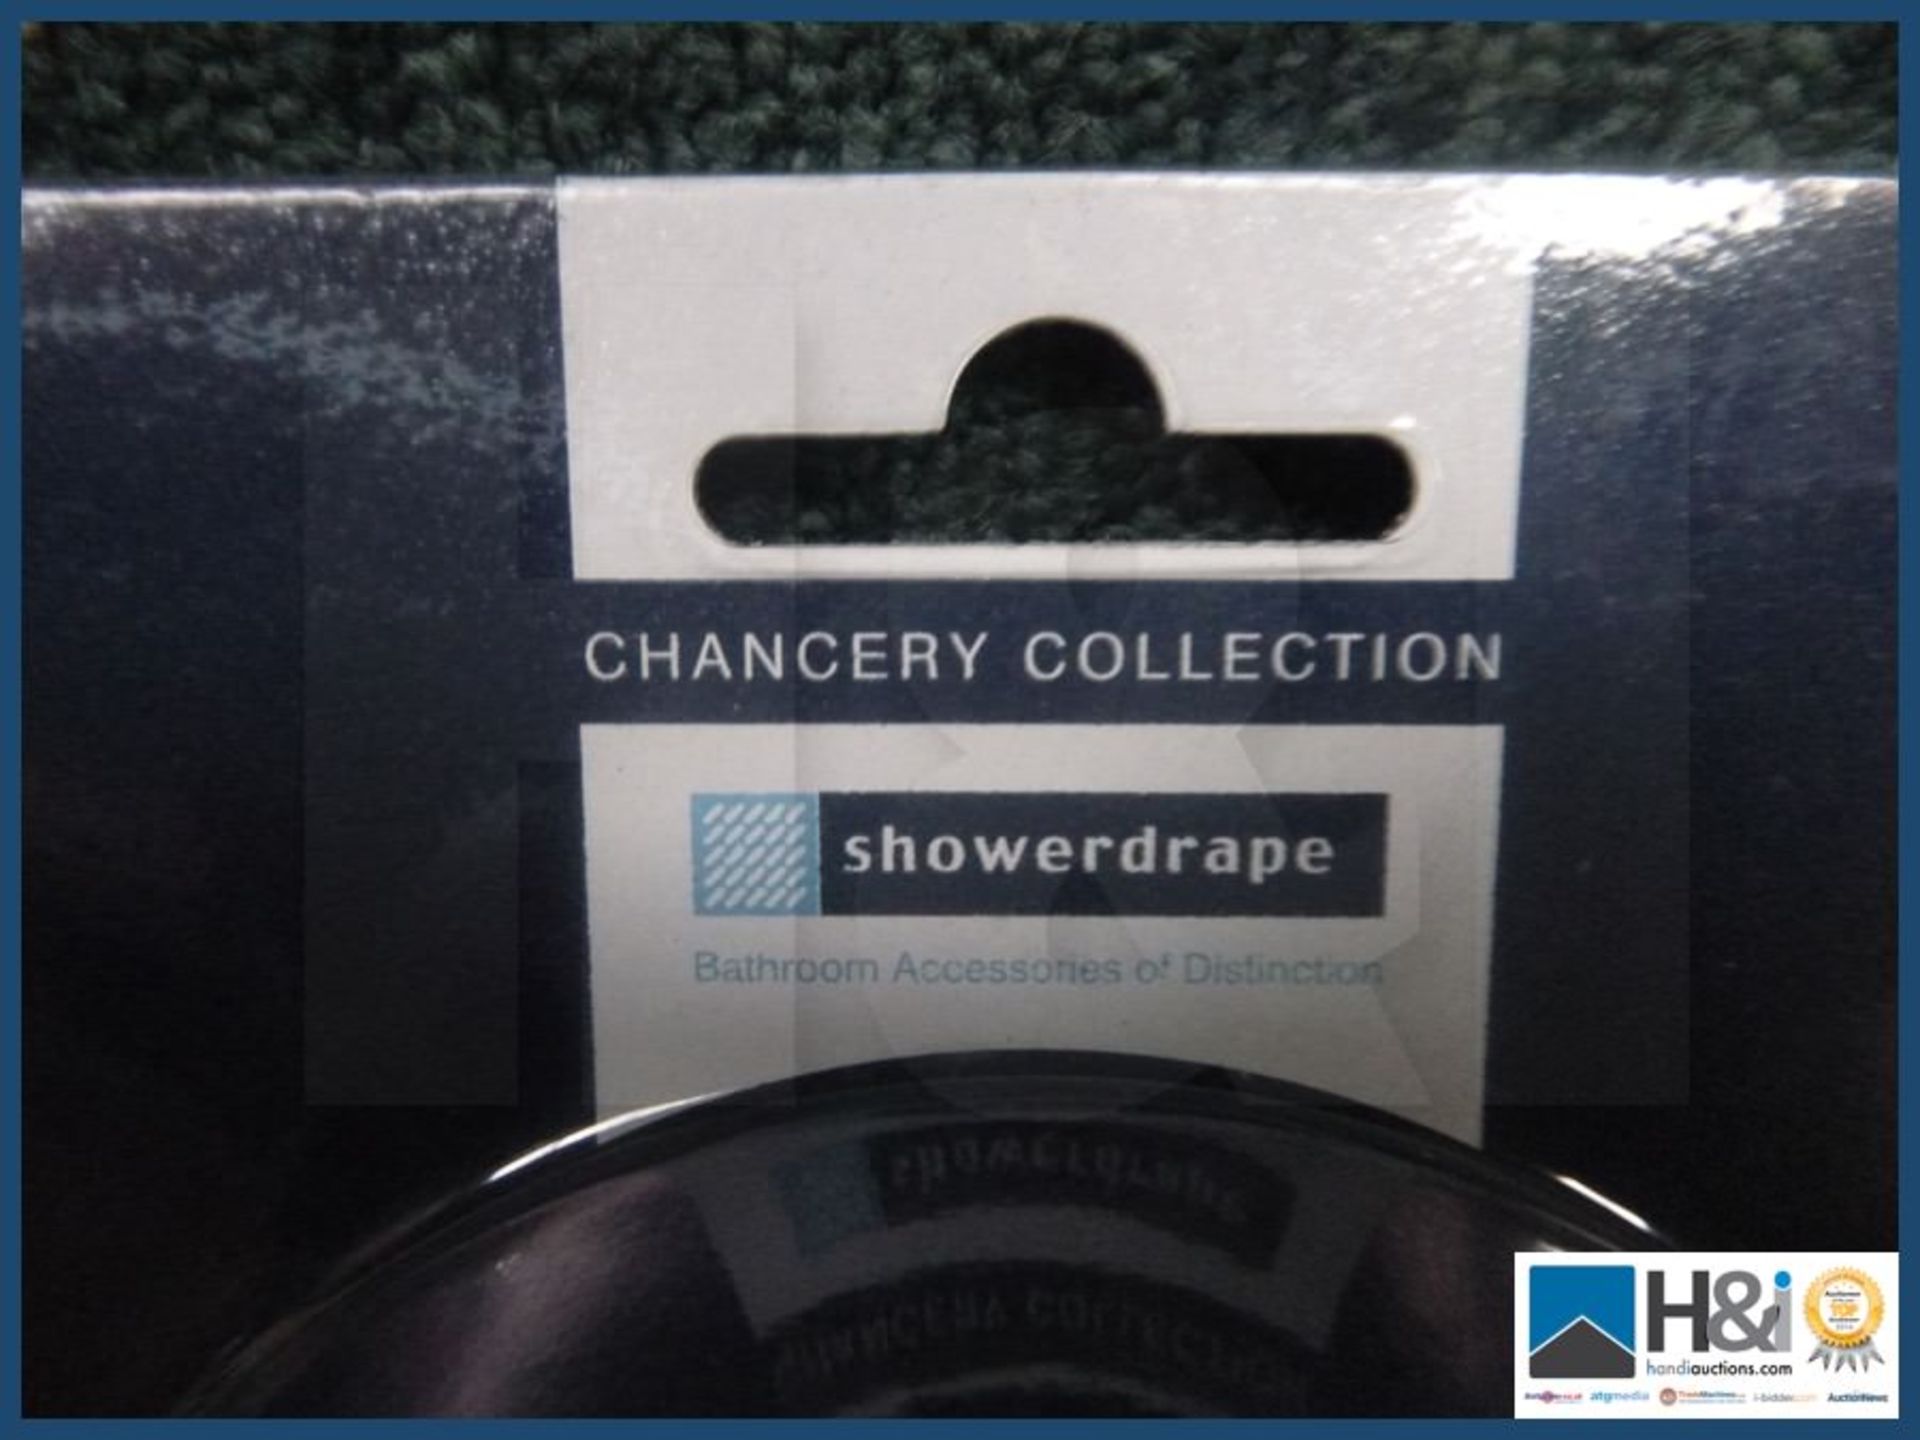 Showerdrape Chancery collection soap dish Chrome and glass finish RRP 20 GBP. - Image 2 of 4